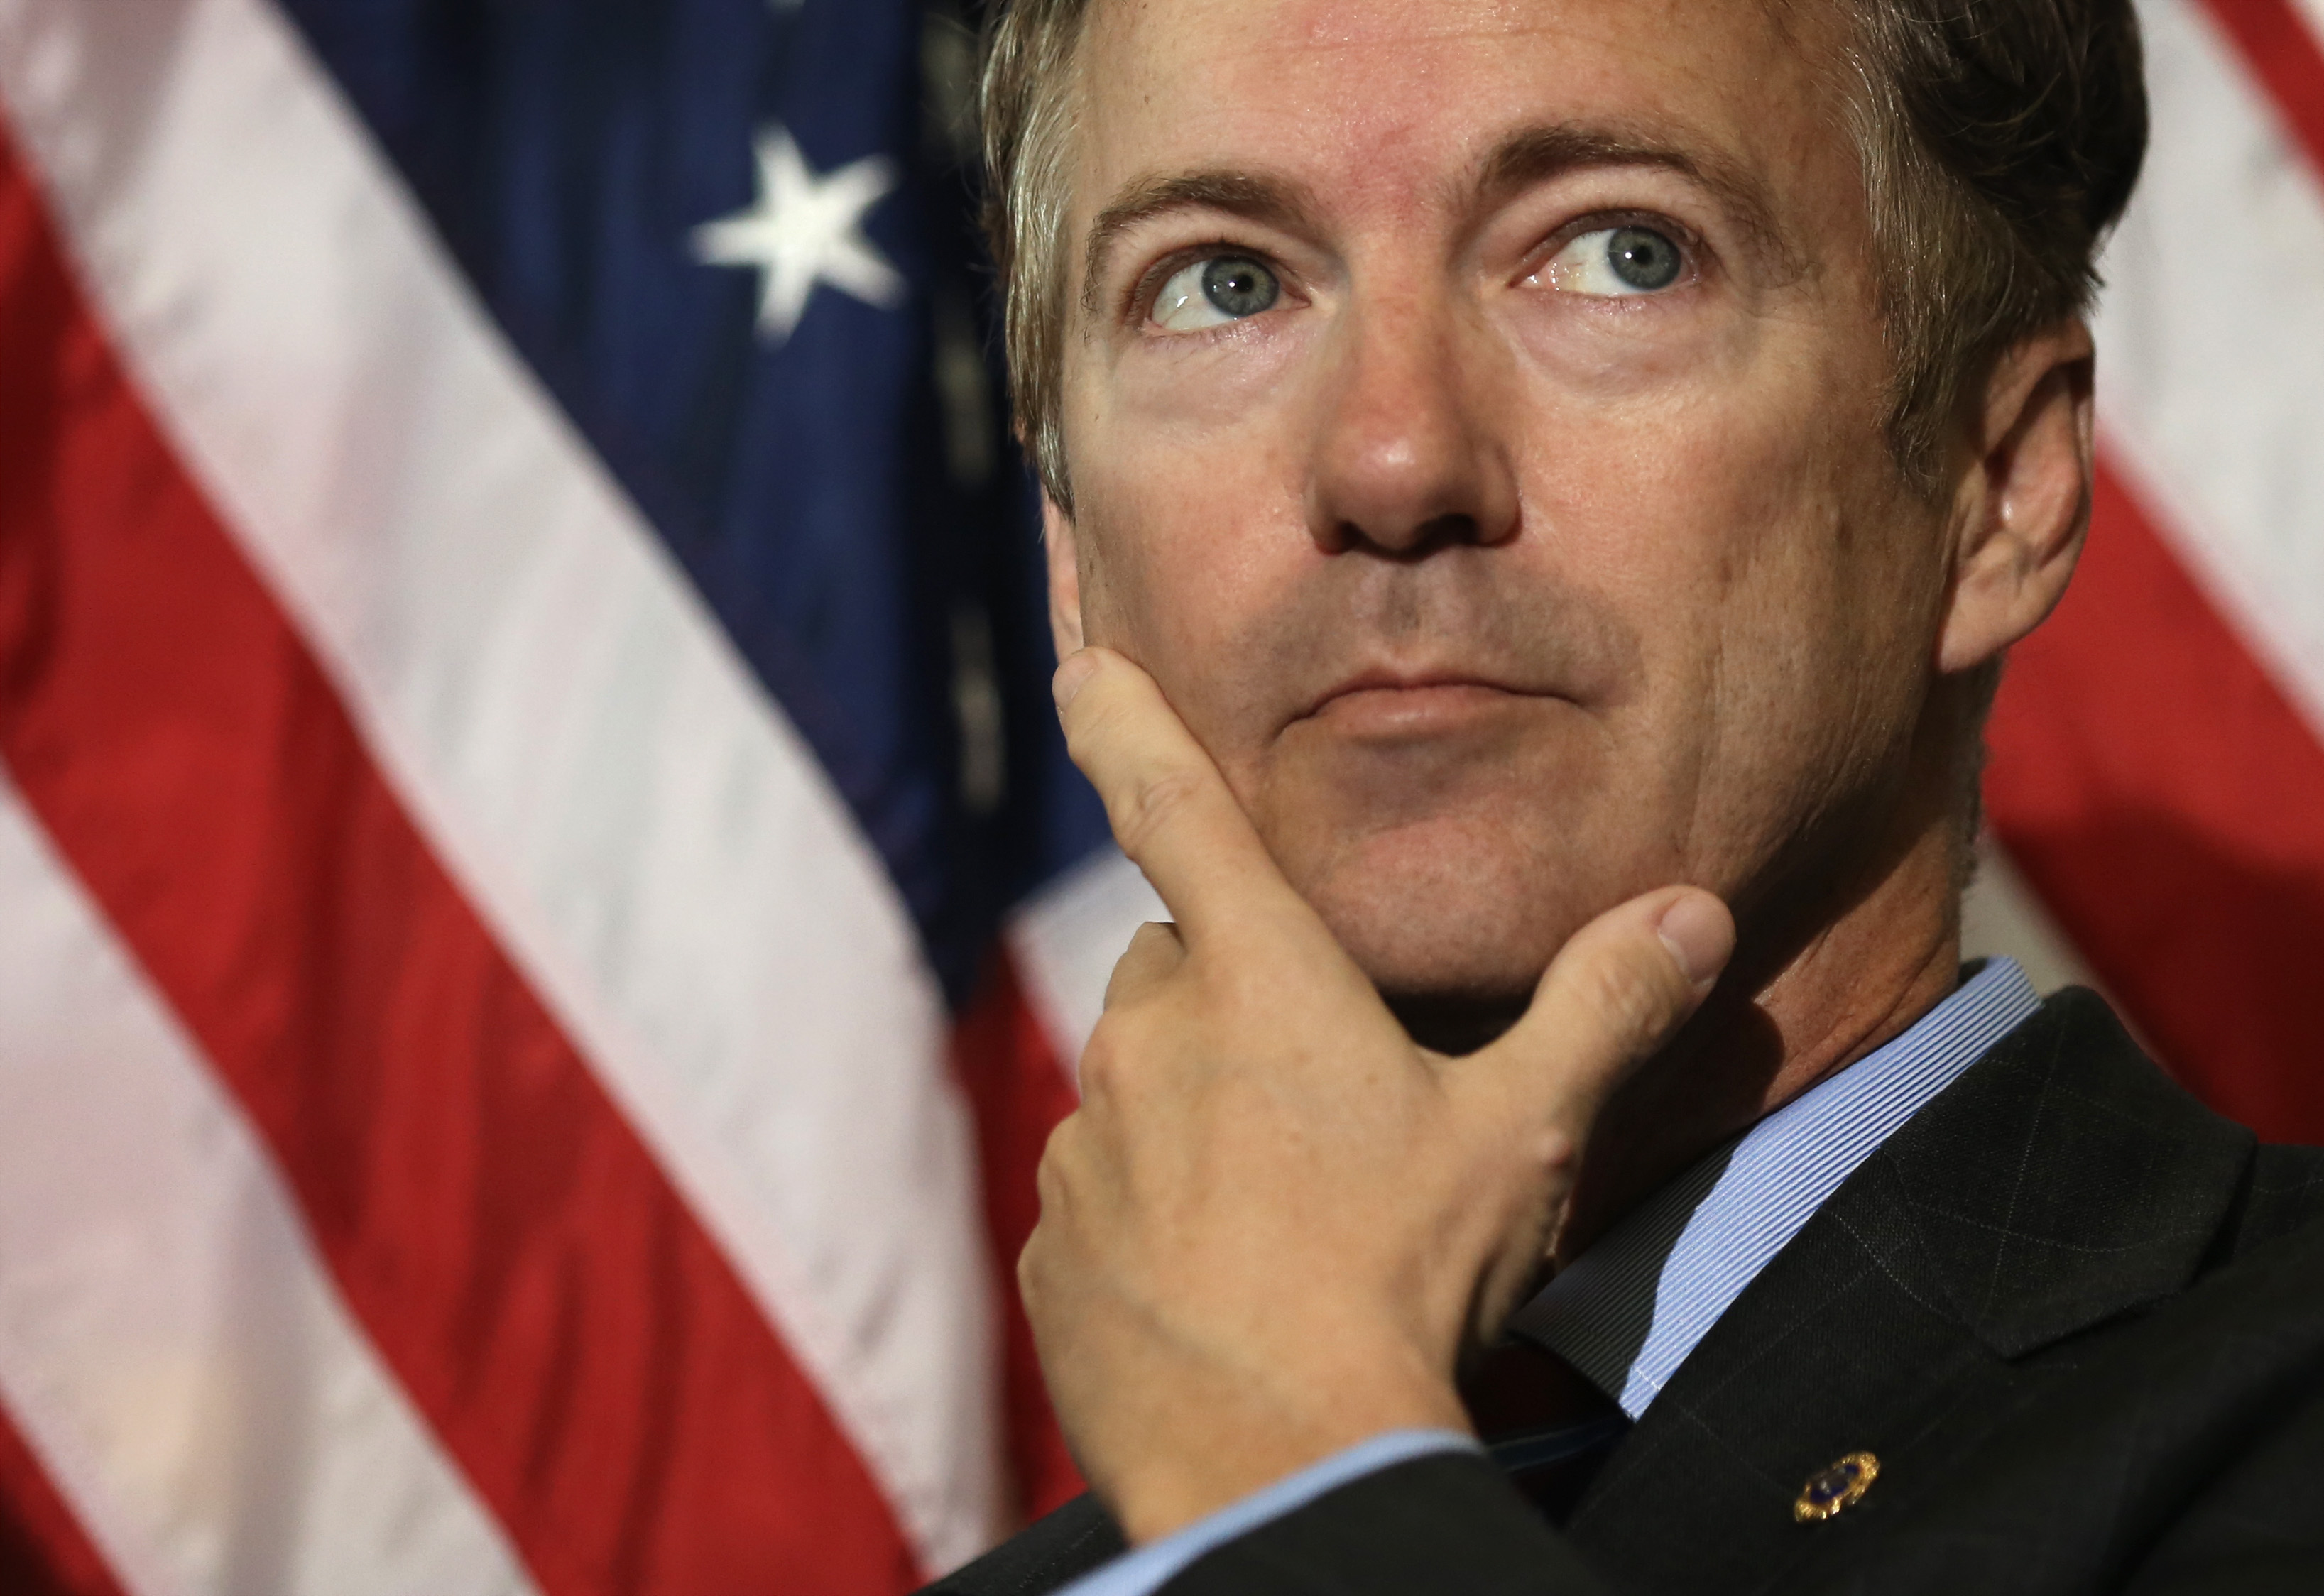 Rand Paul (R-KY) on November 6, 2013 on Capitol Hill in Washington, DC. (Alex Wong&mdash;Getty Images)